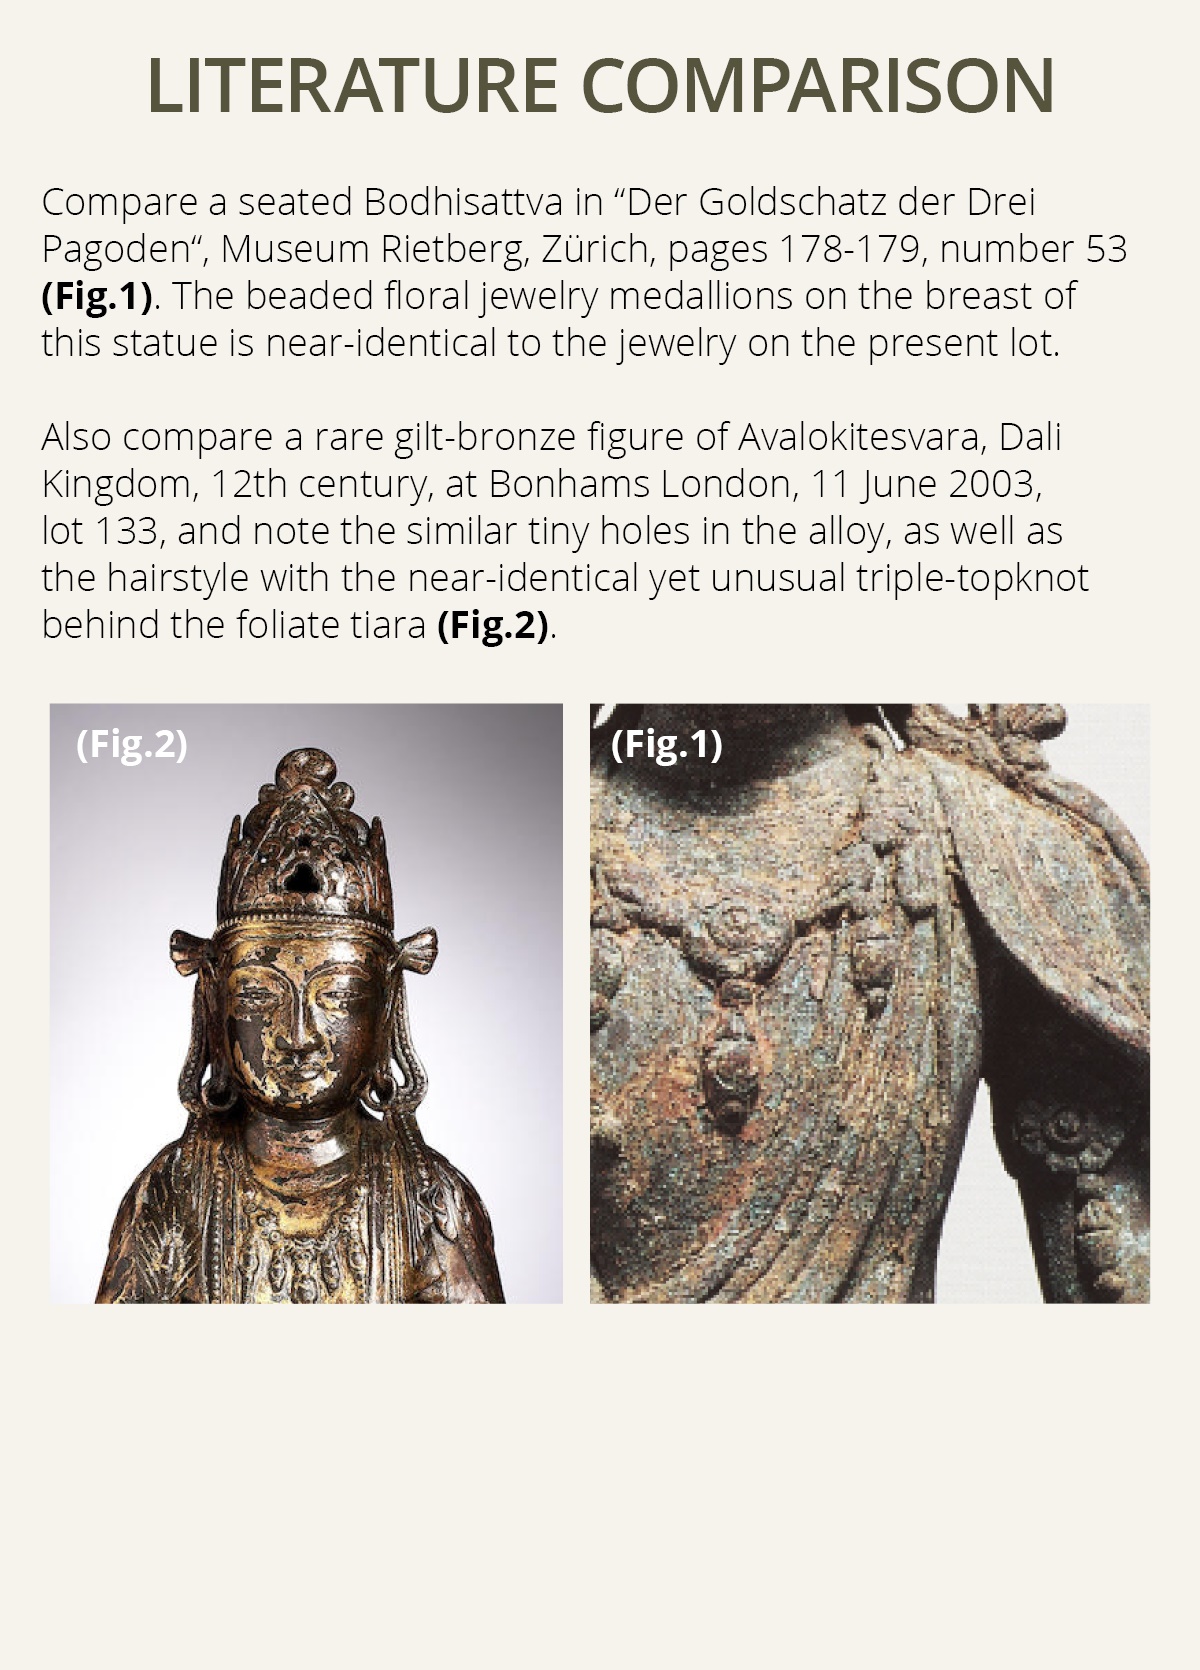 AN EXCEEDINGLY RARE BRONZE FIGURE OF GUANYIN, DALI KINGDOM, 12TH - MID-13TH CENTURY - Image 5 of 20